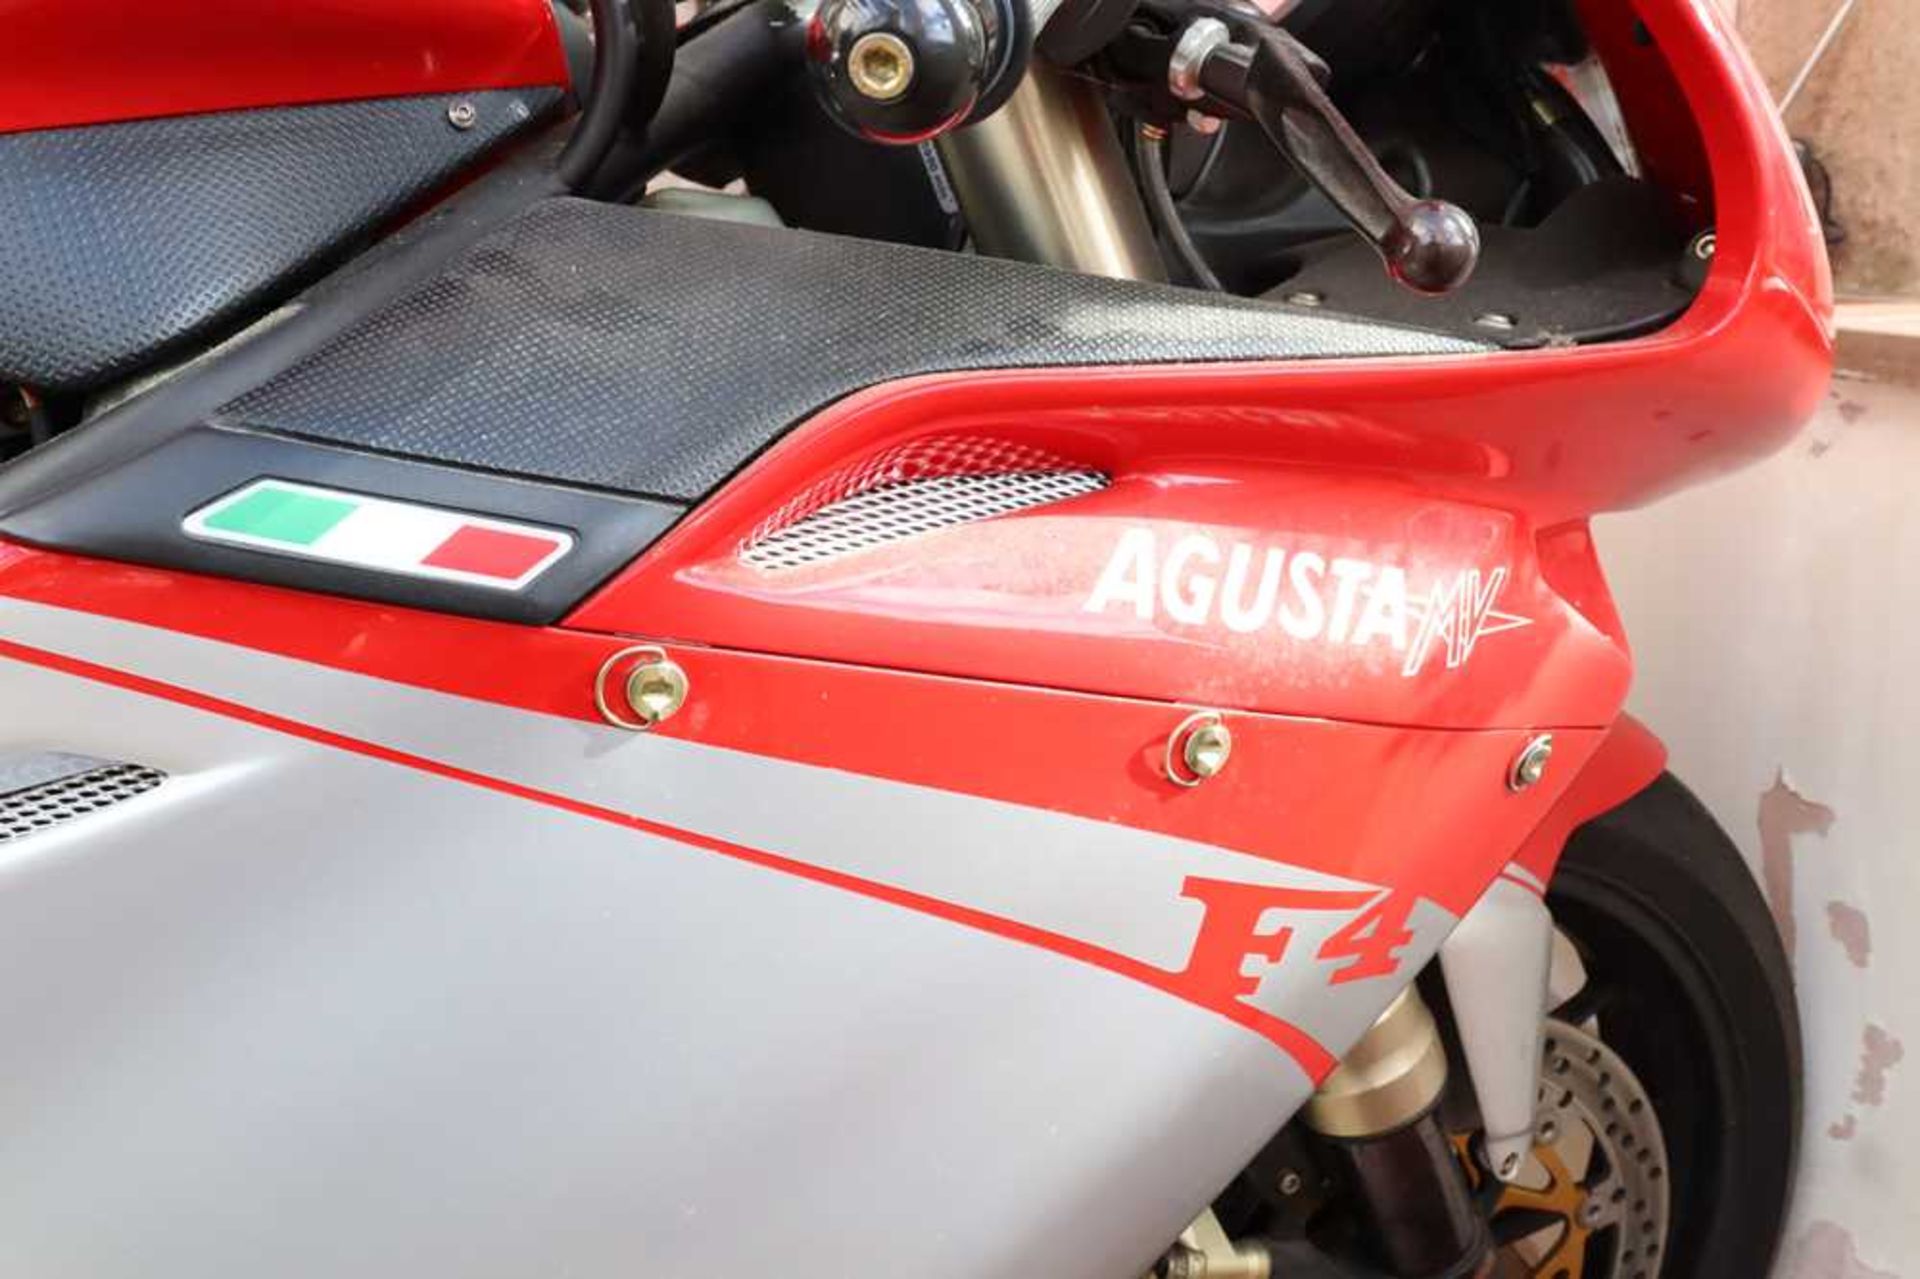 2007 MV Agusta F4 1000 R One owner from new - Image 9 of 41